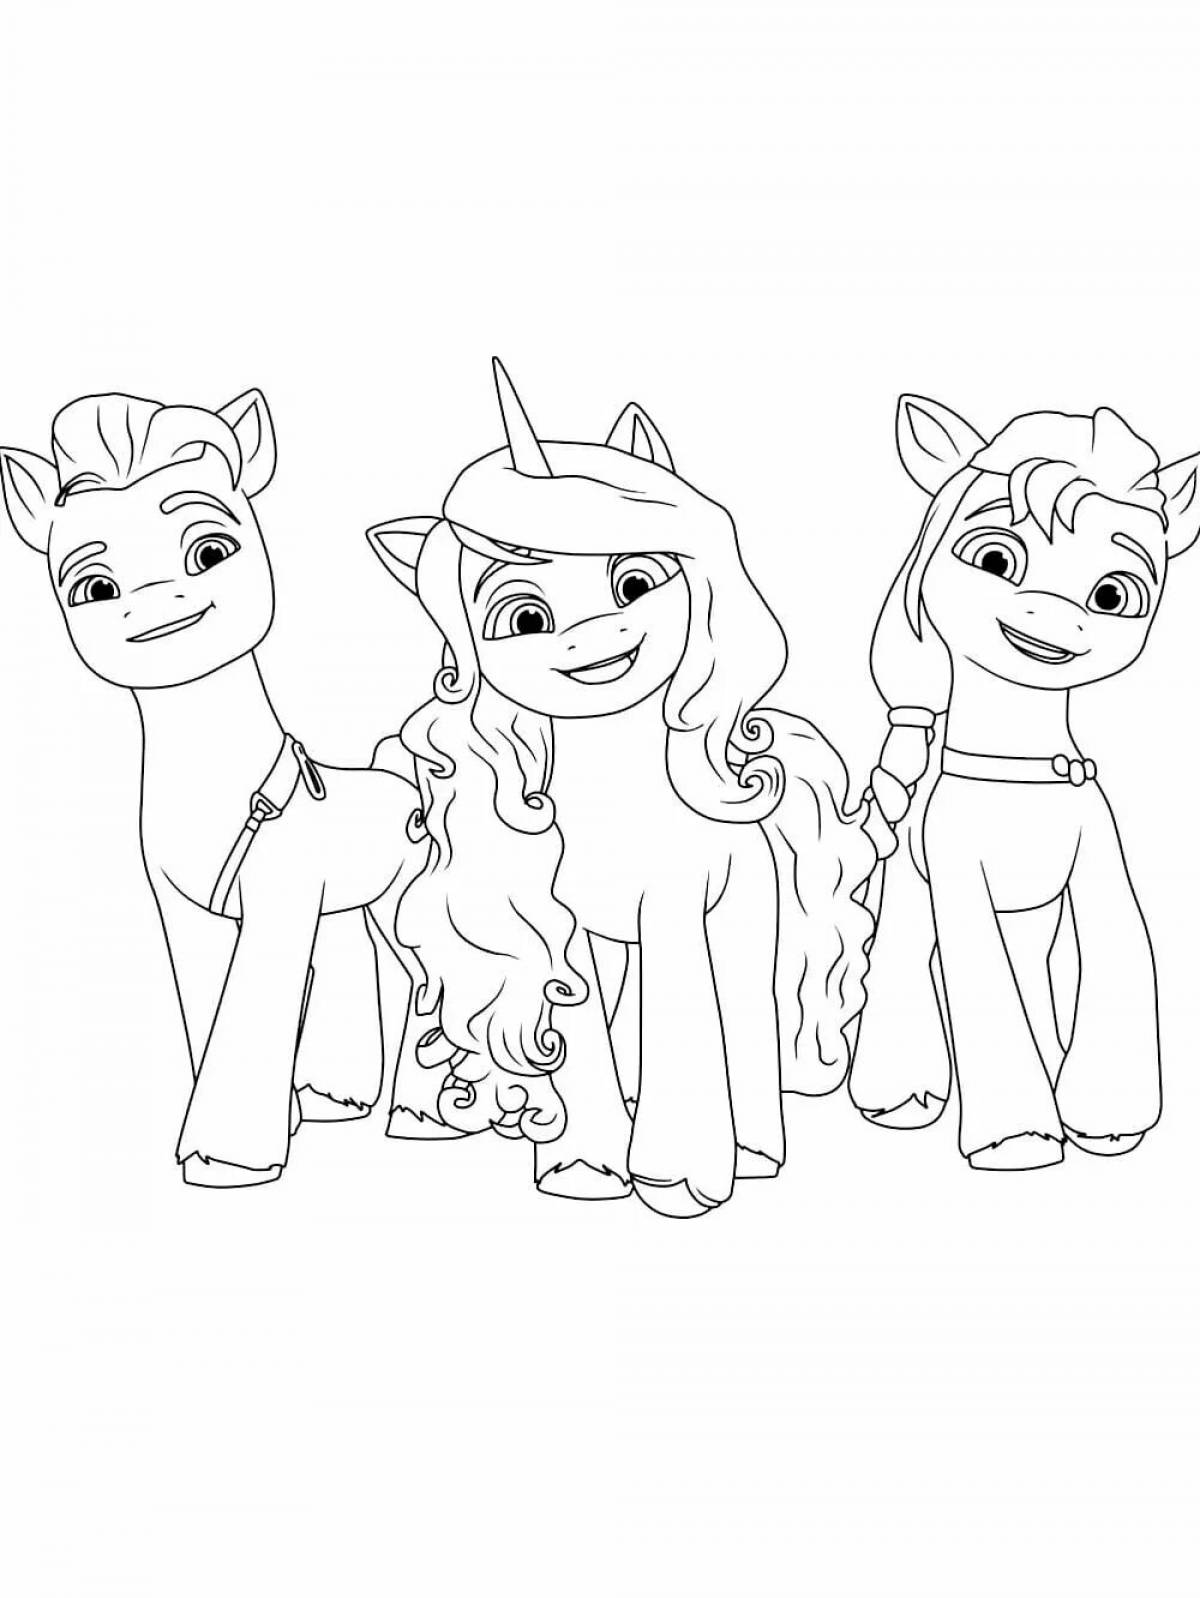 Exciting pony izzy coloring book